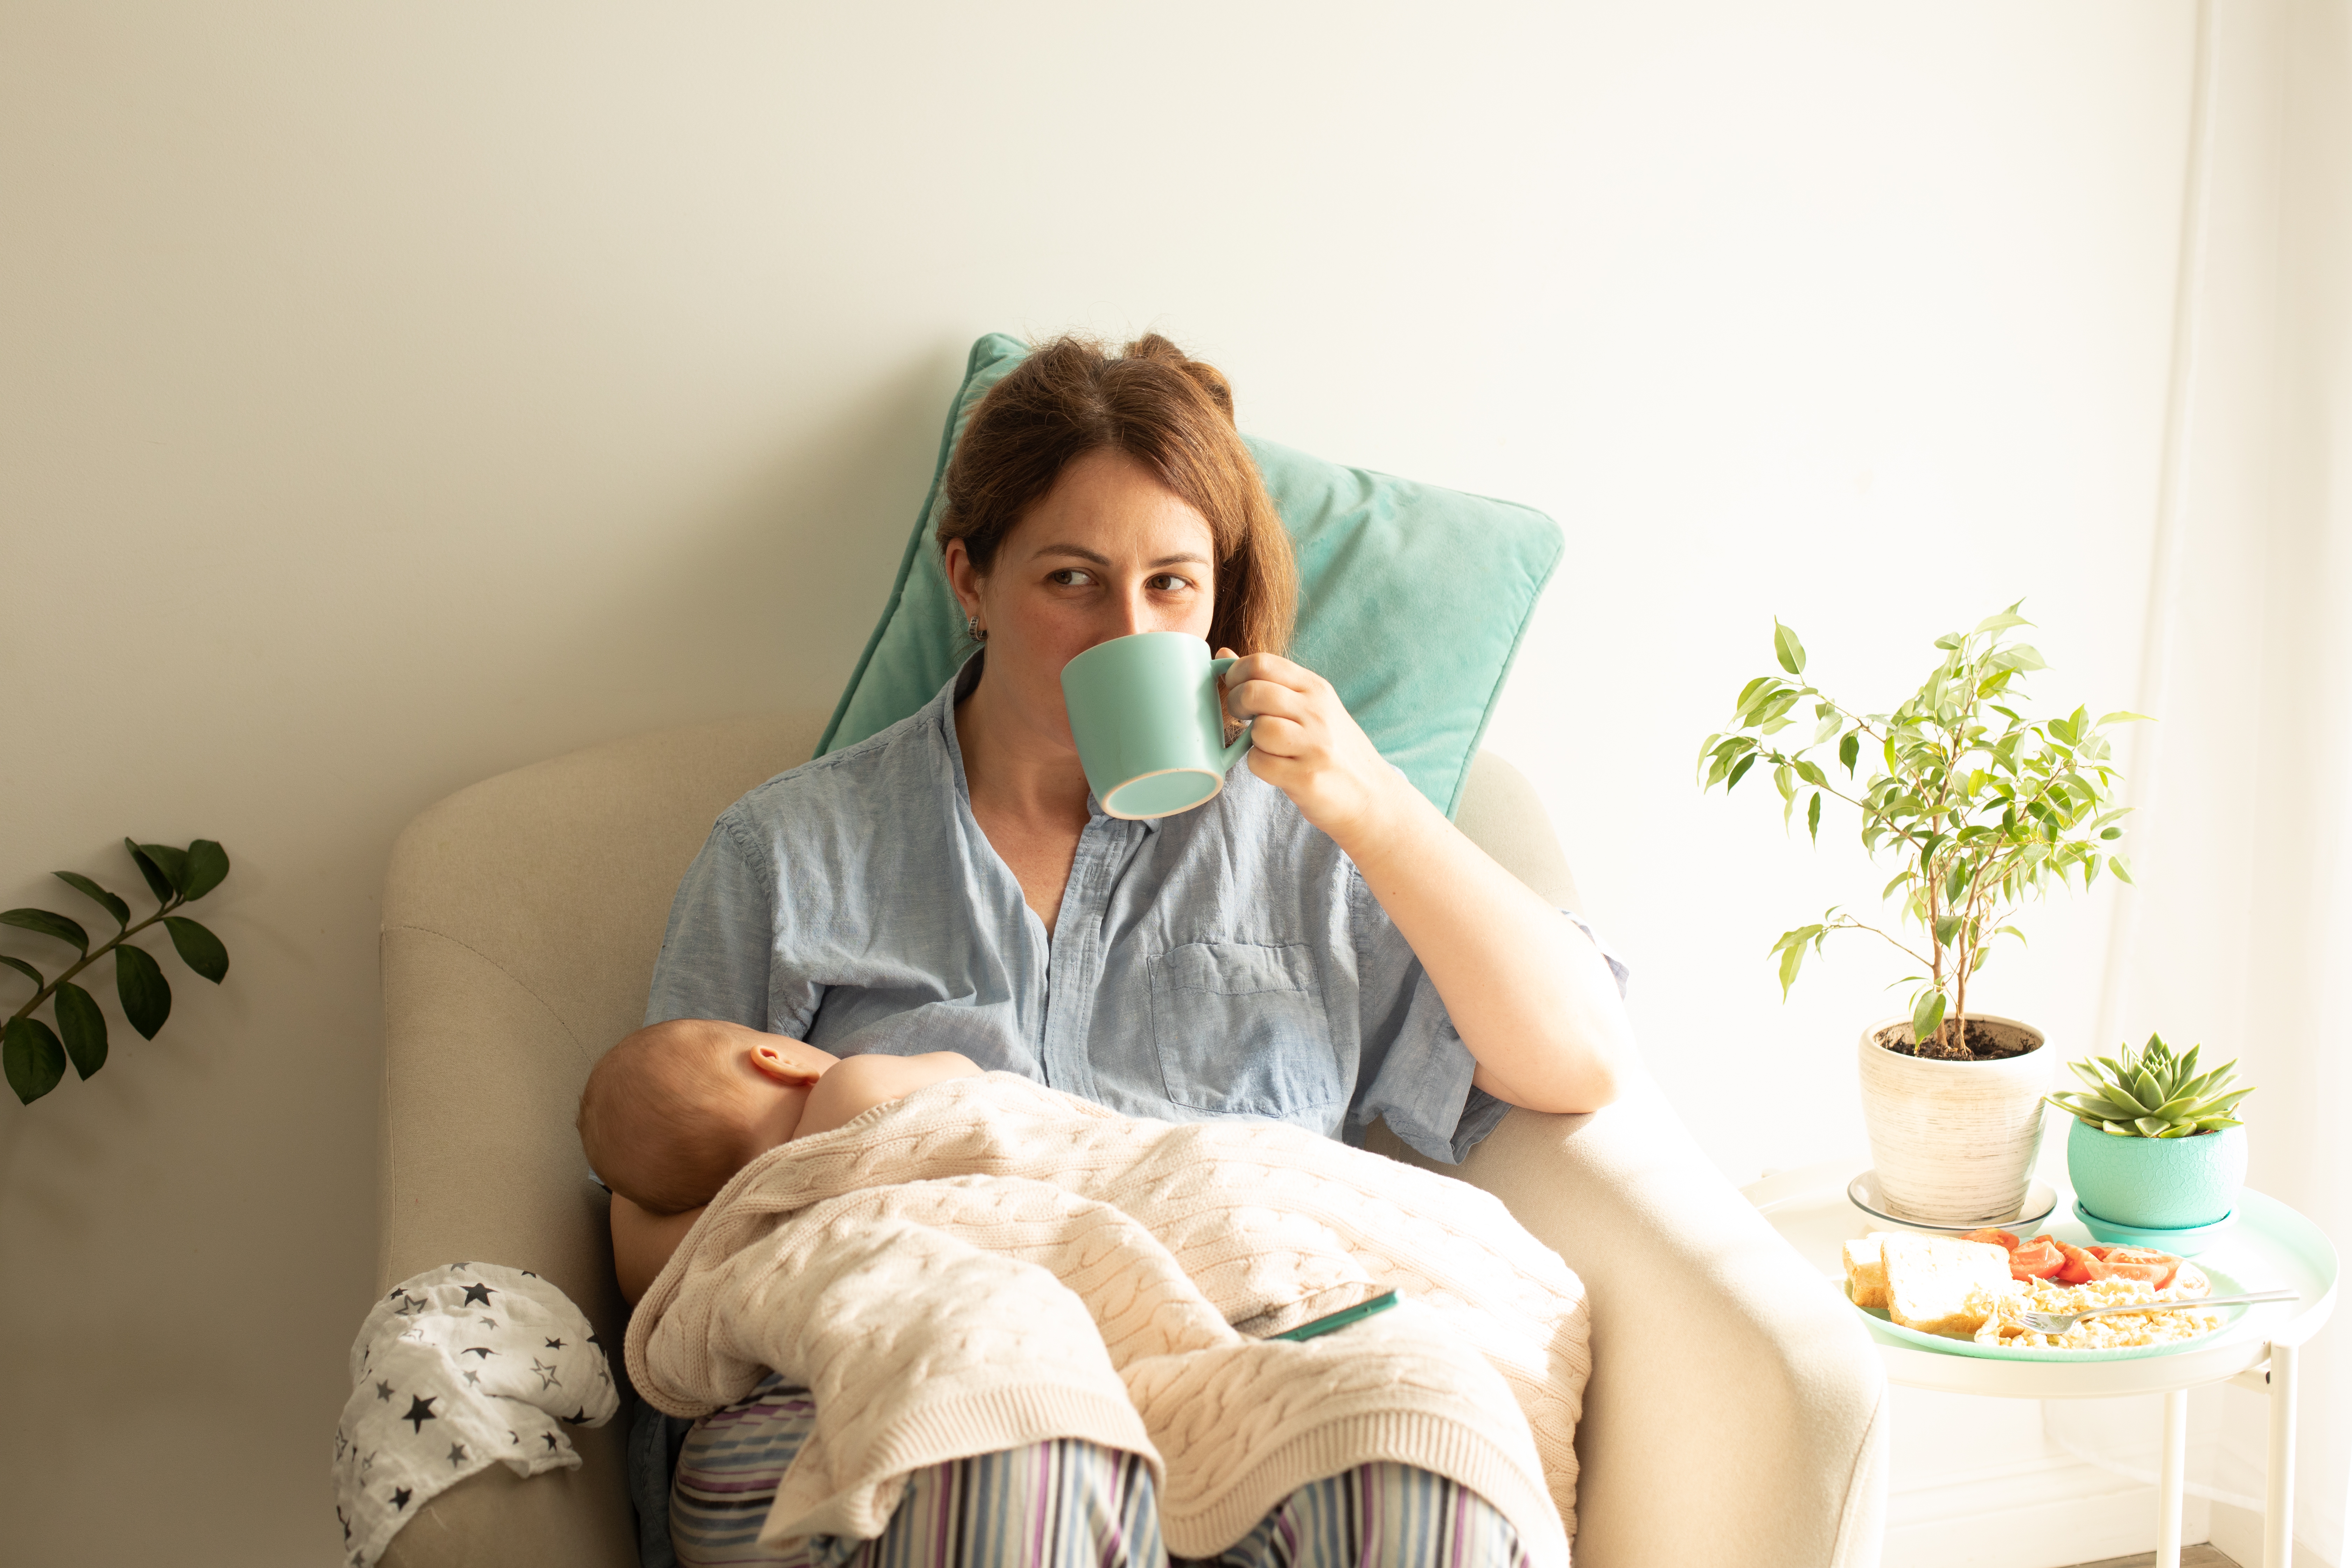 A woman drinking tea while holding her baby | Source: Shutterstock